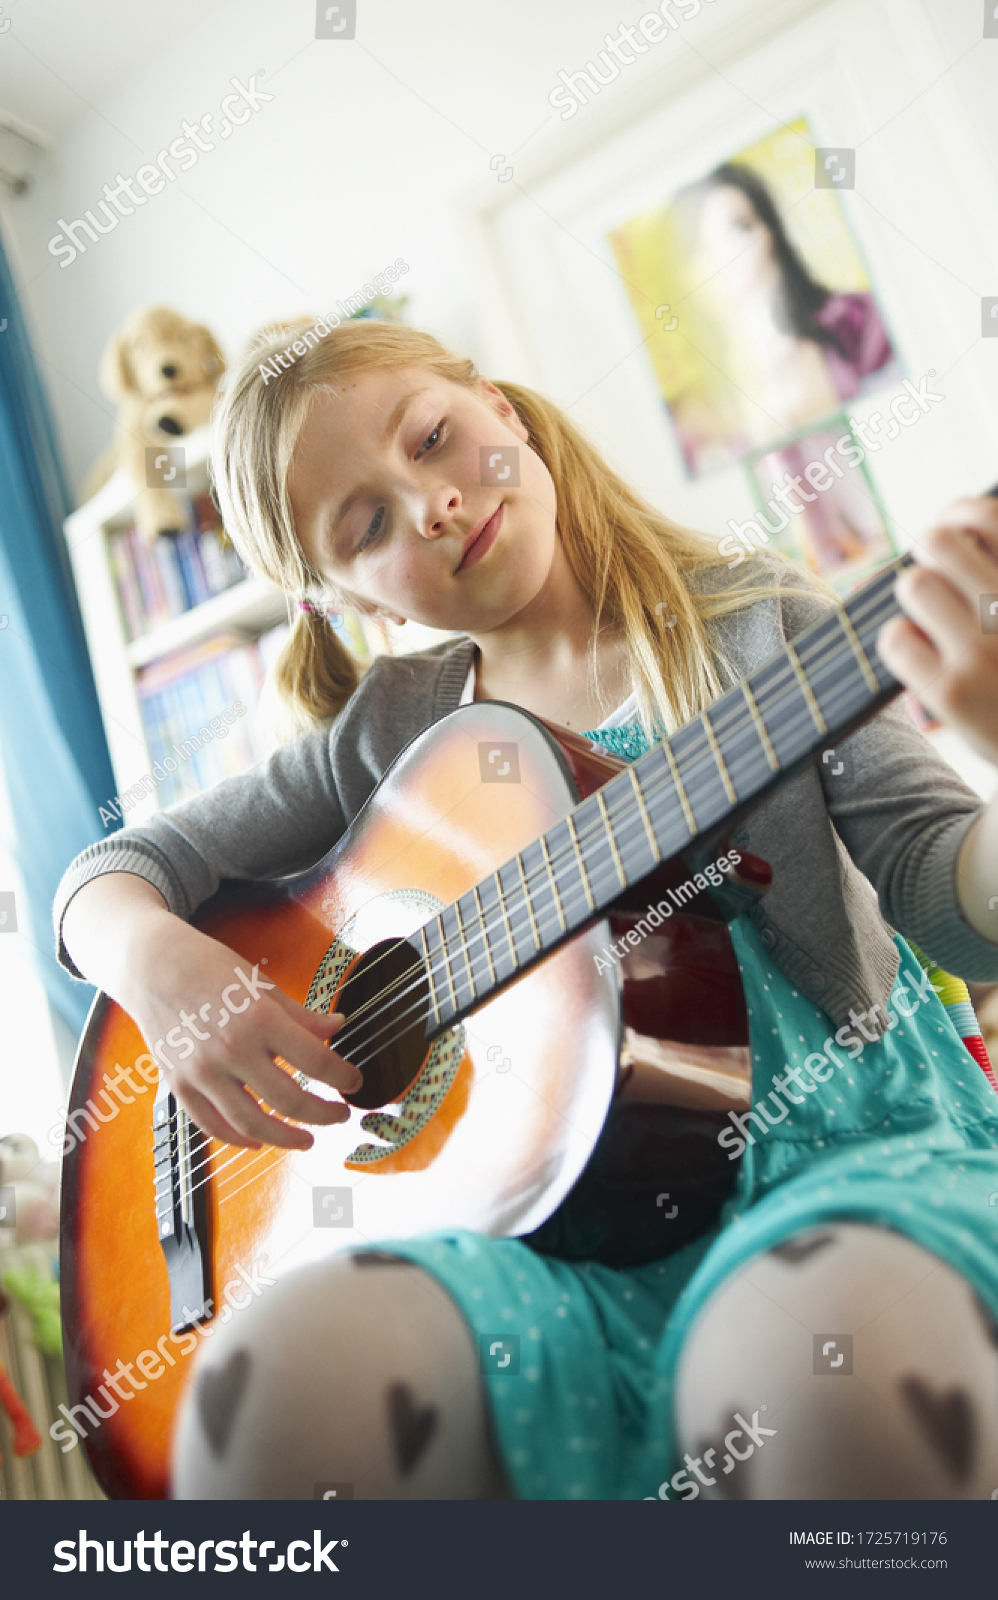 Young girl playing guitar in bedroom #1725719176